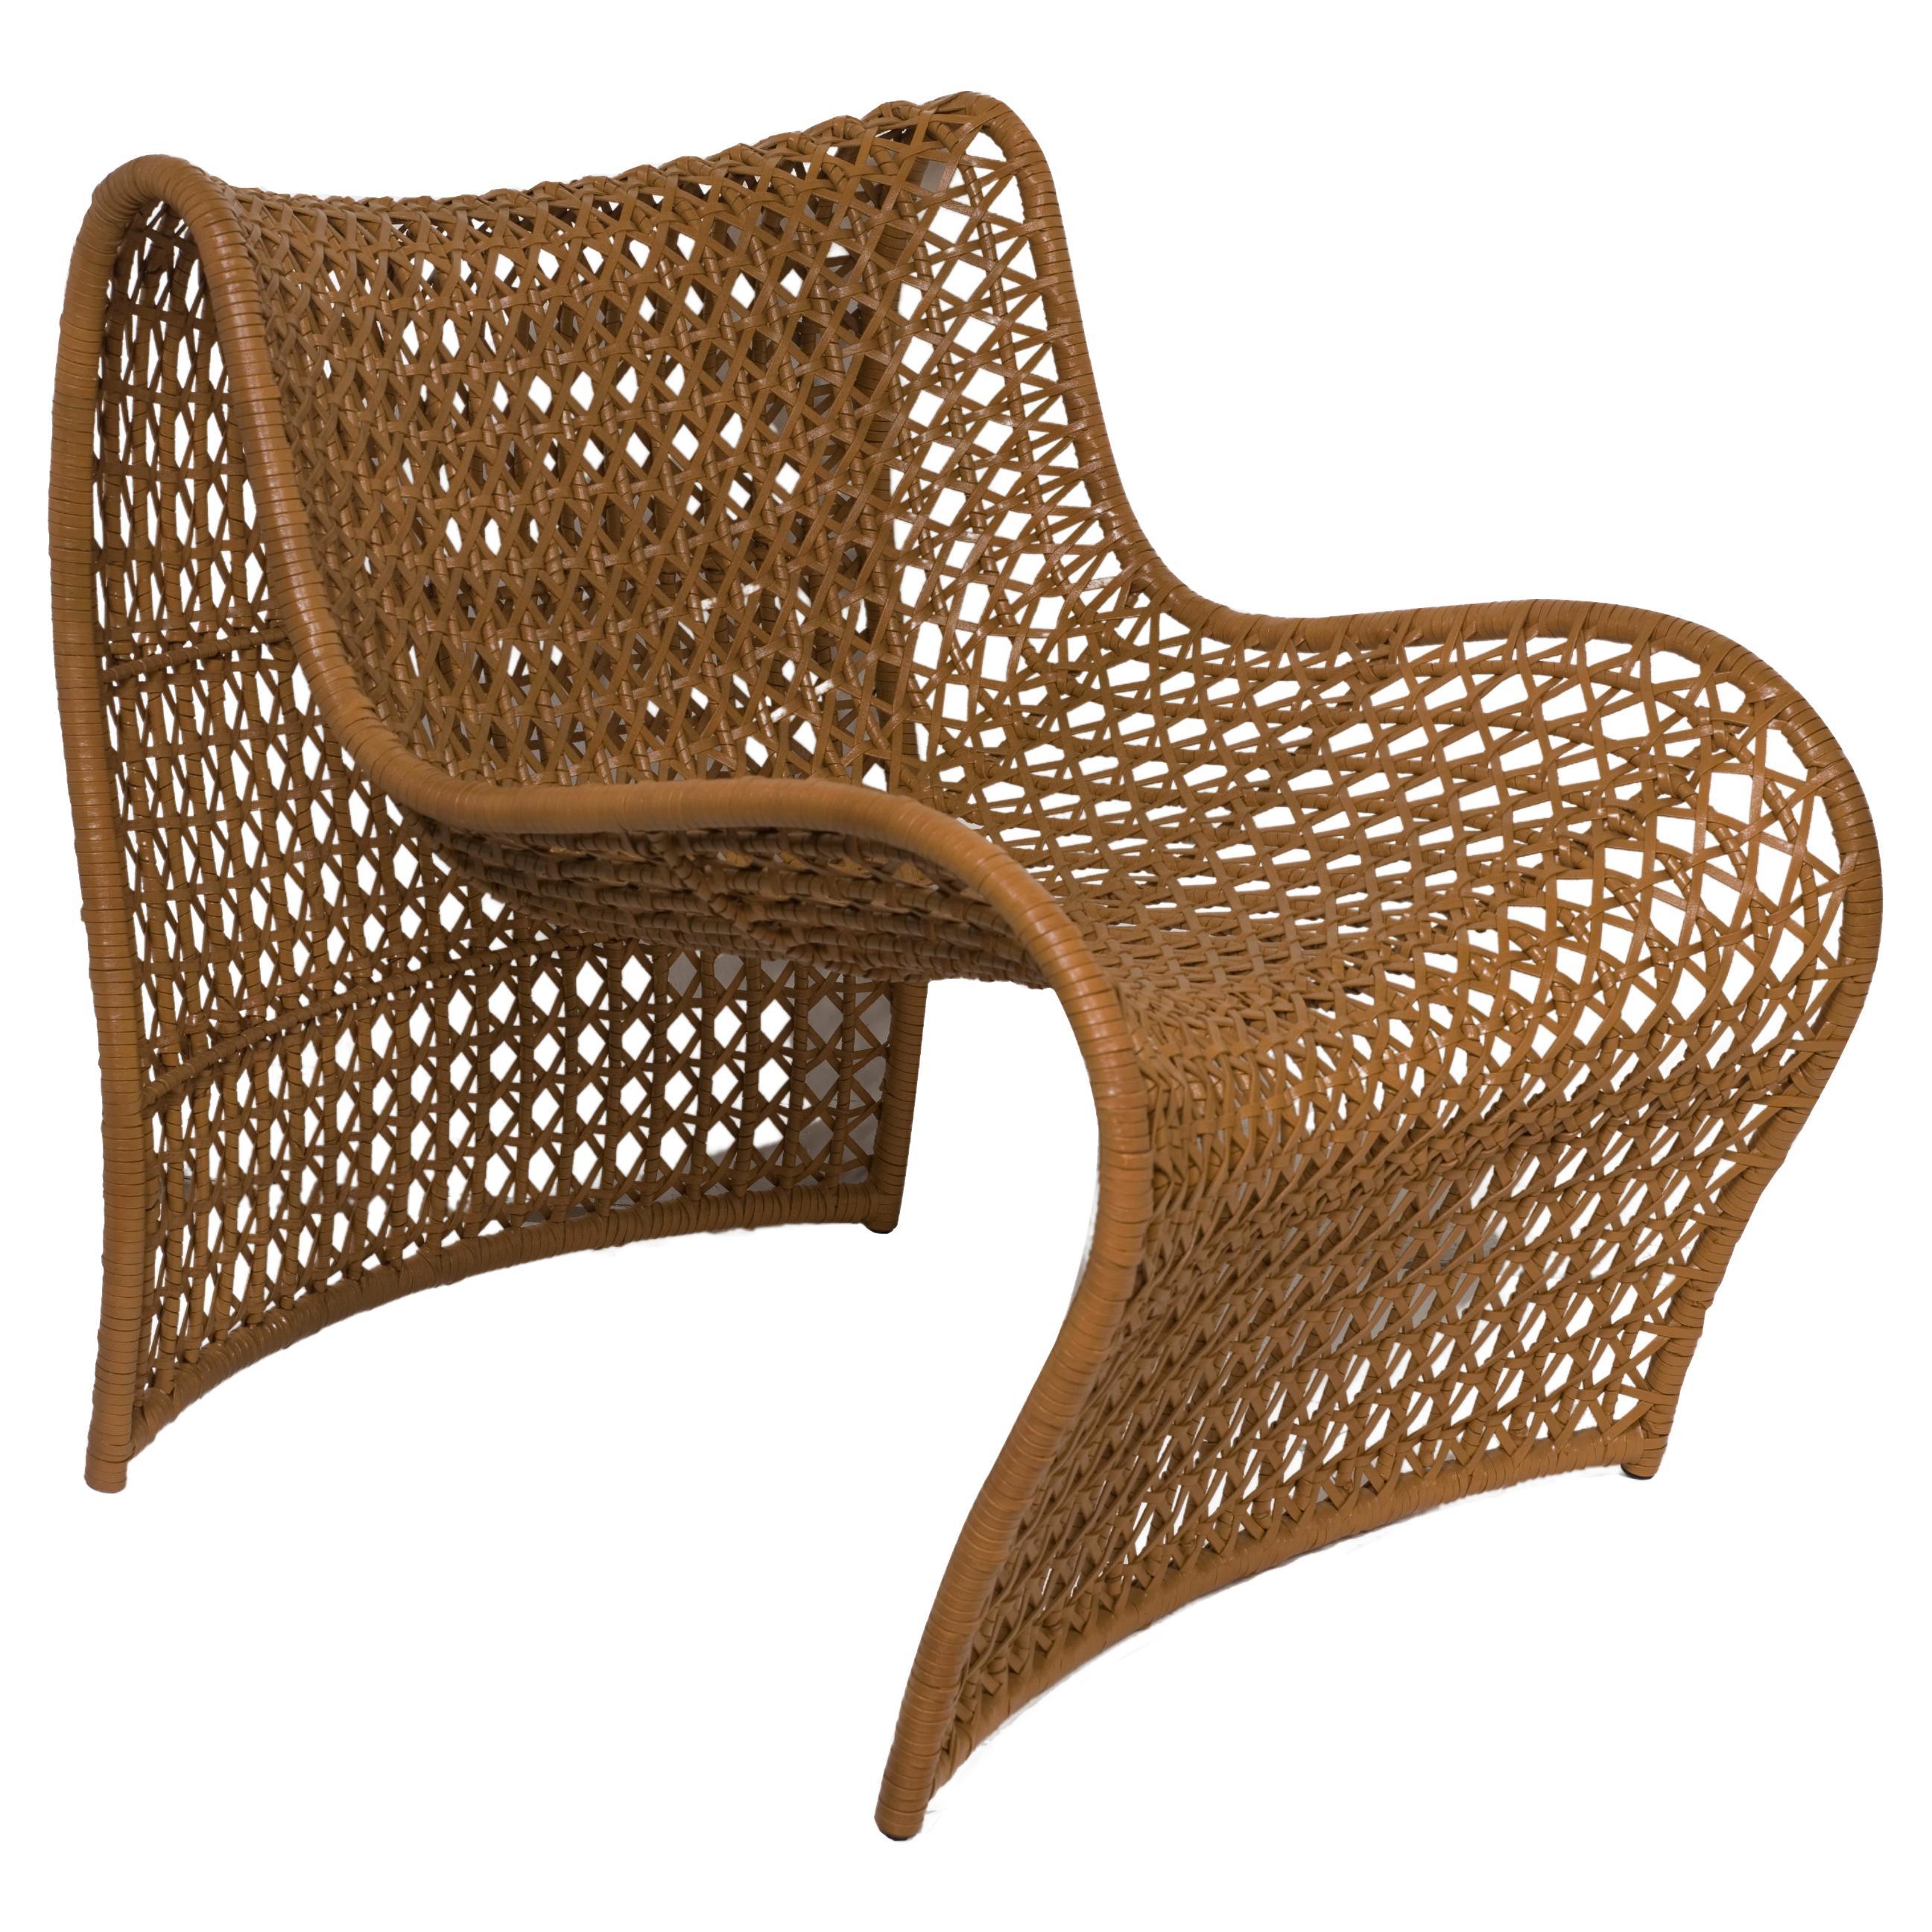 Lola Open Weave Chair For Sale